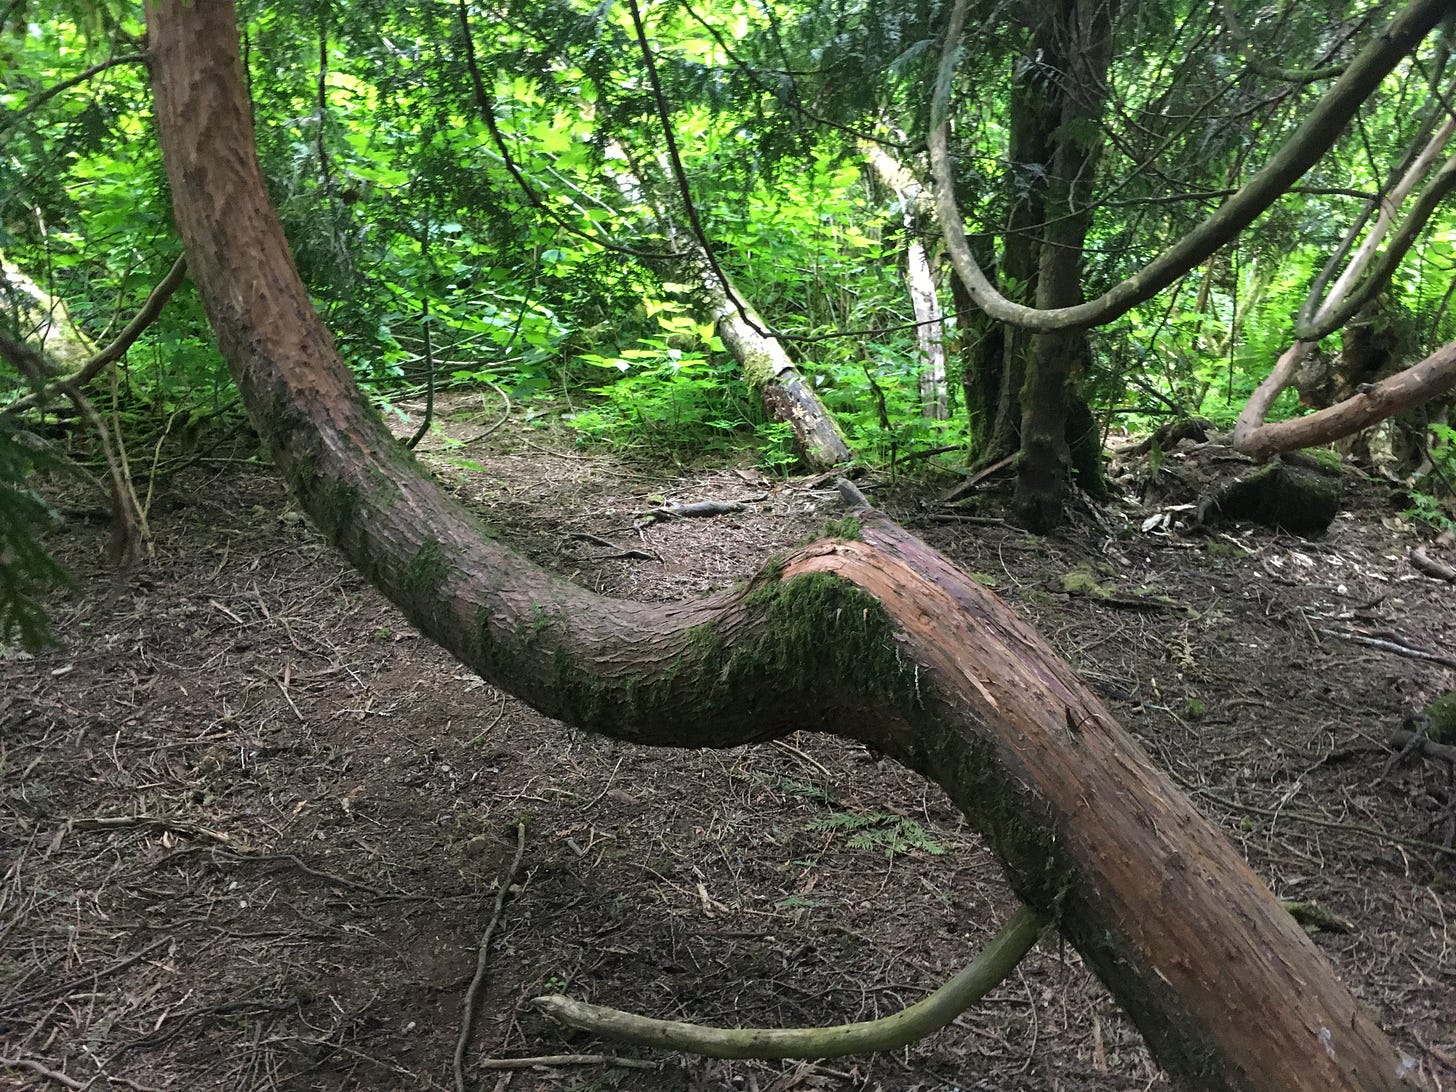 center of image is a long tree branch that is shaped like an S and a U and the base of the U is a spot a human could sit on. in the background is greenery that is sunlit and the ground is dirt and twigs.